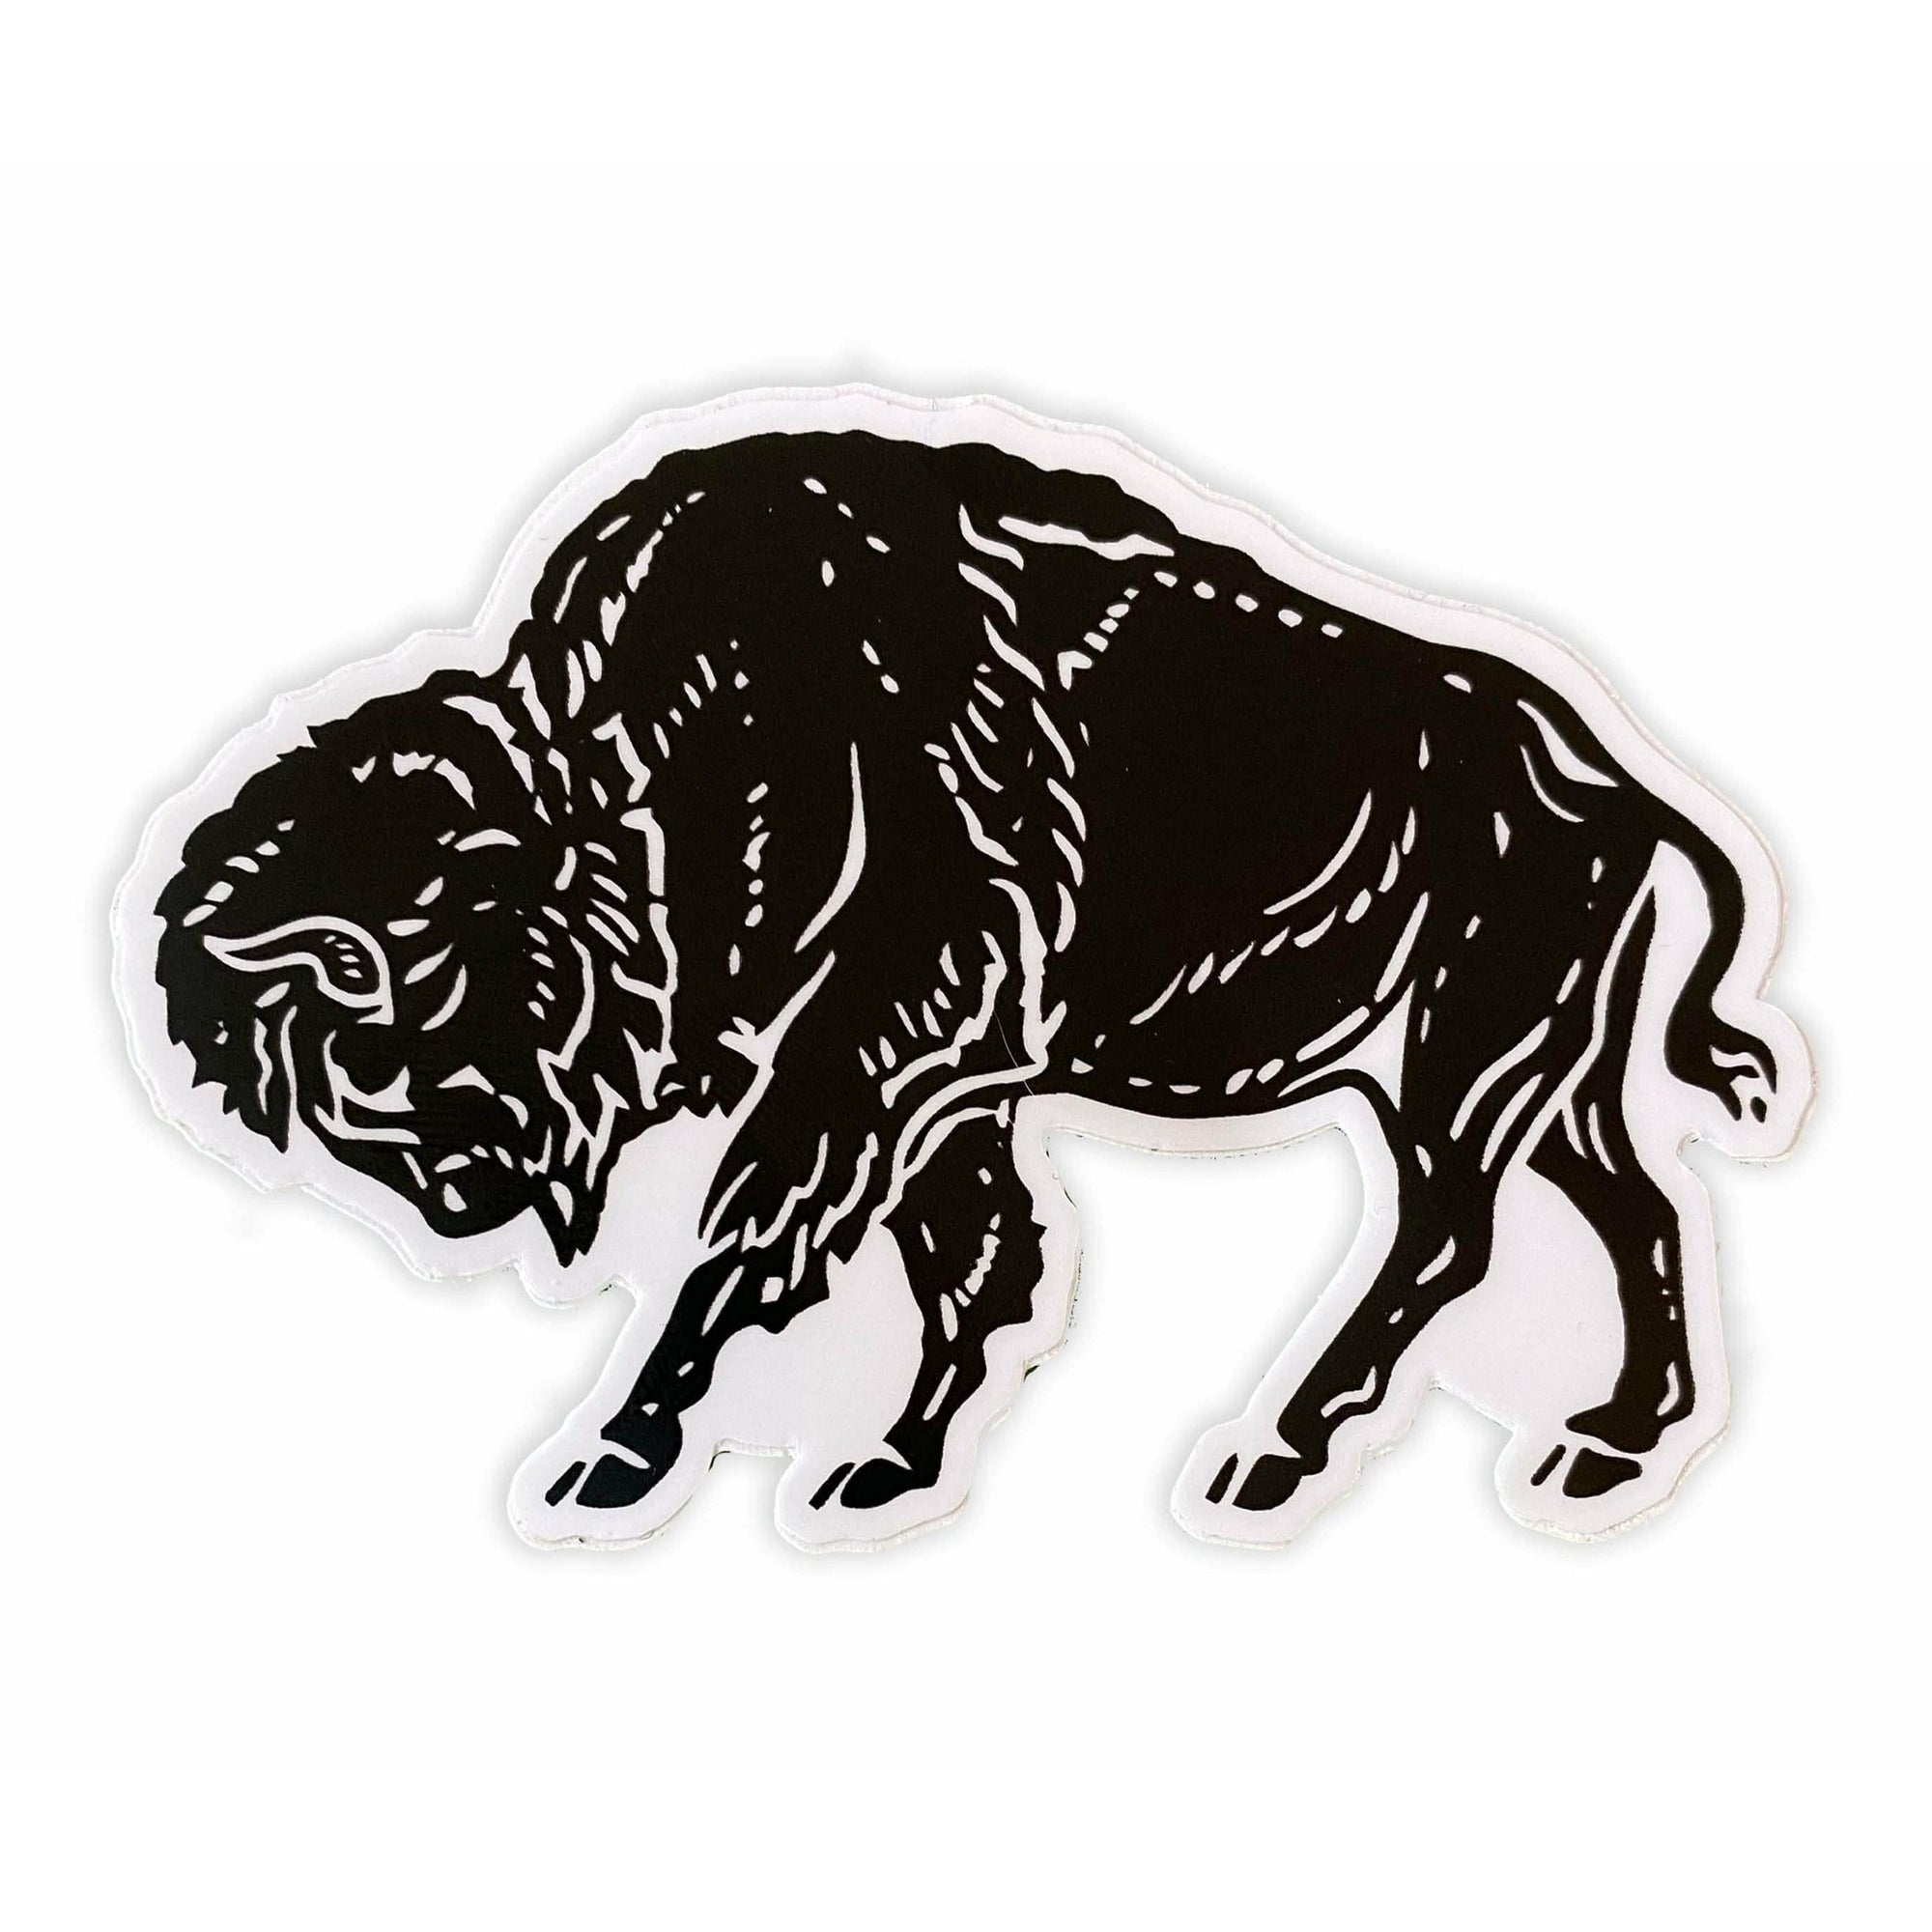 A black and white Bison Sticker of a buffalo from The Wild Wander.